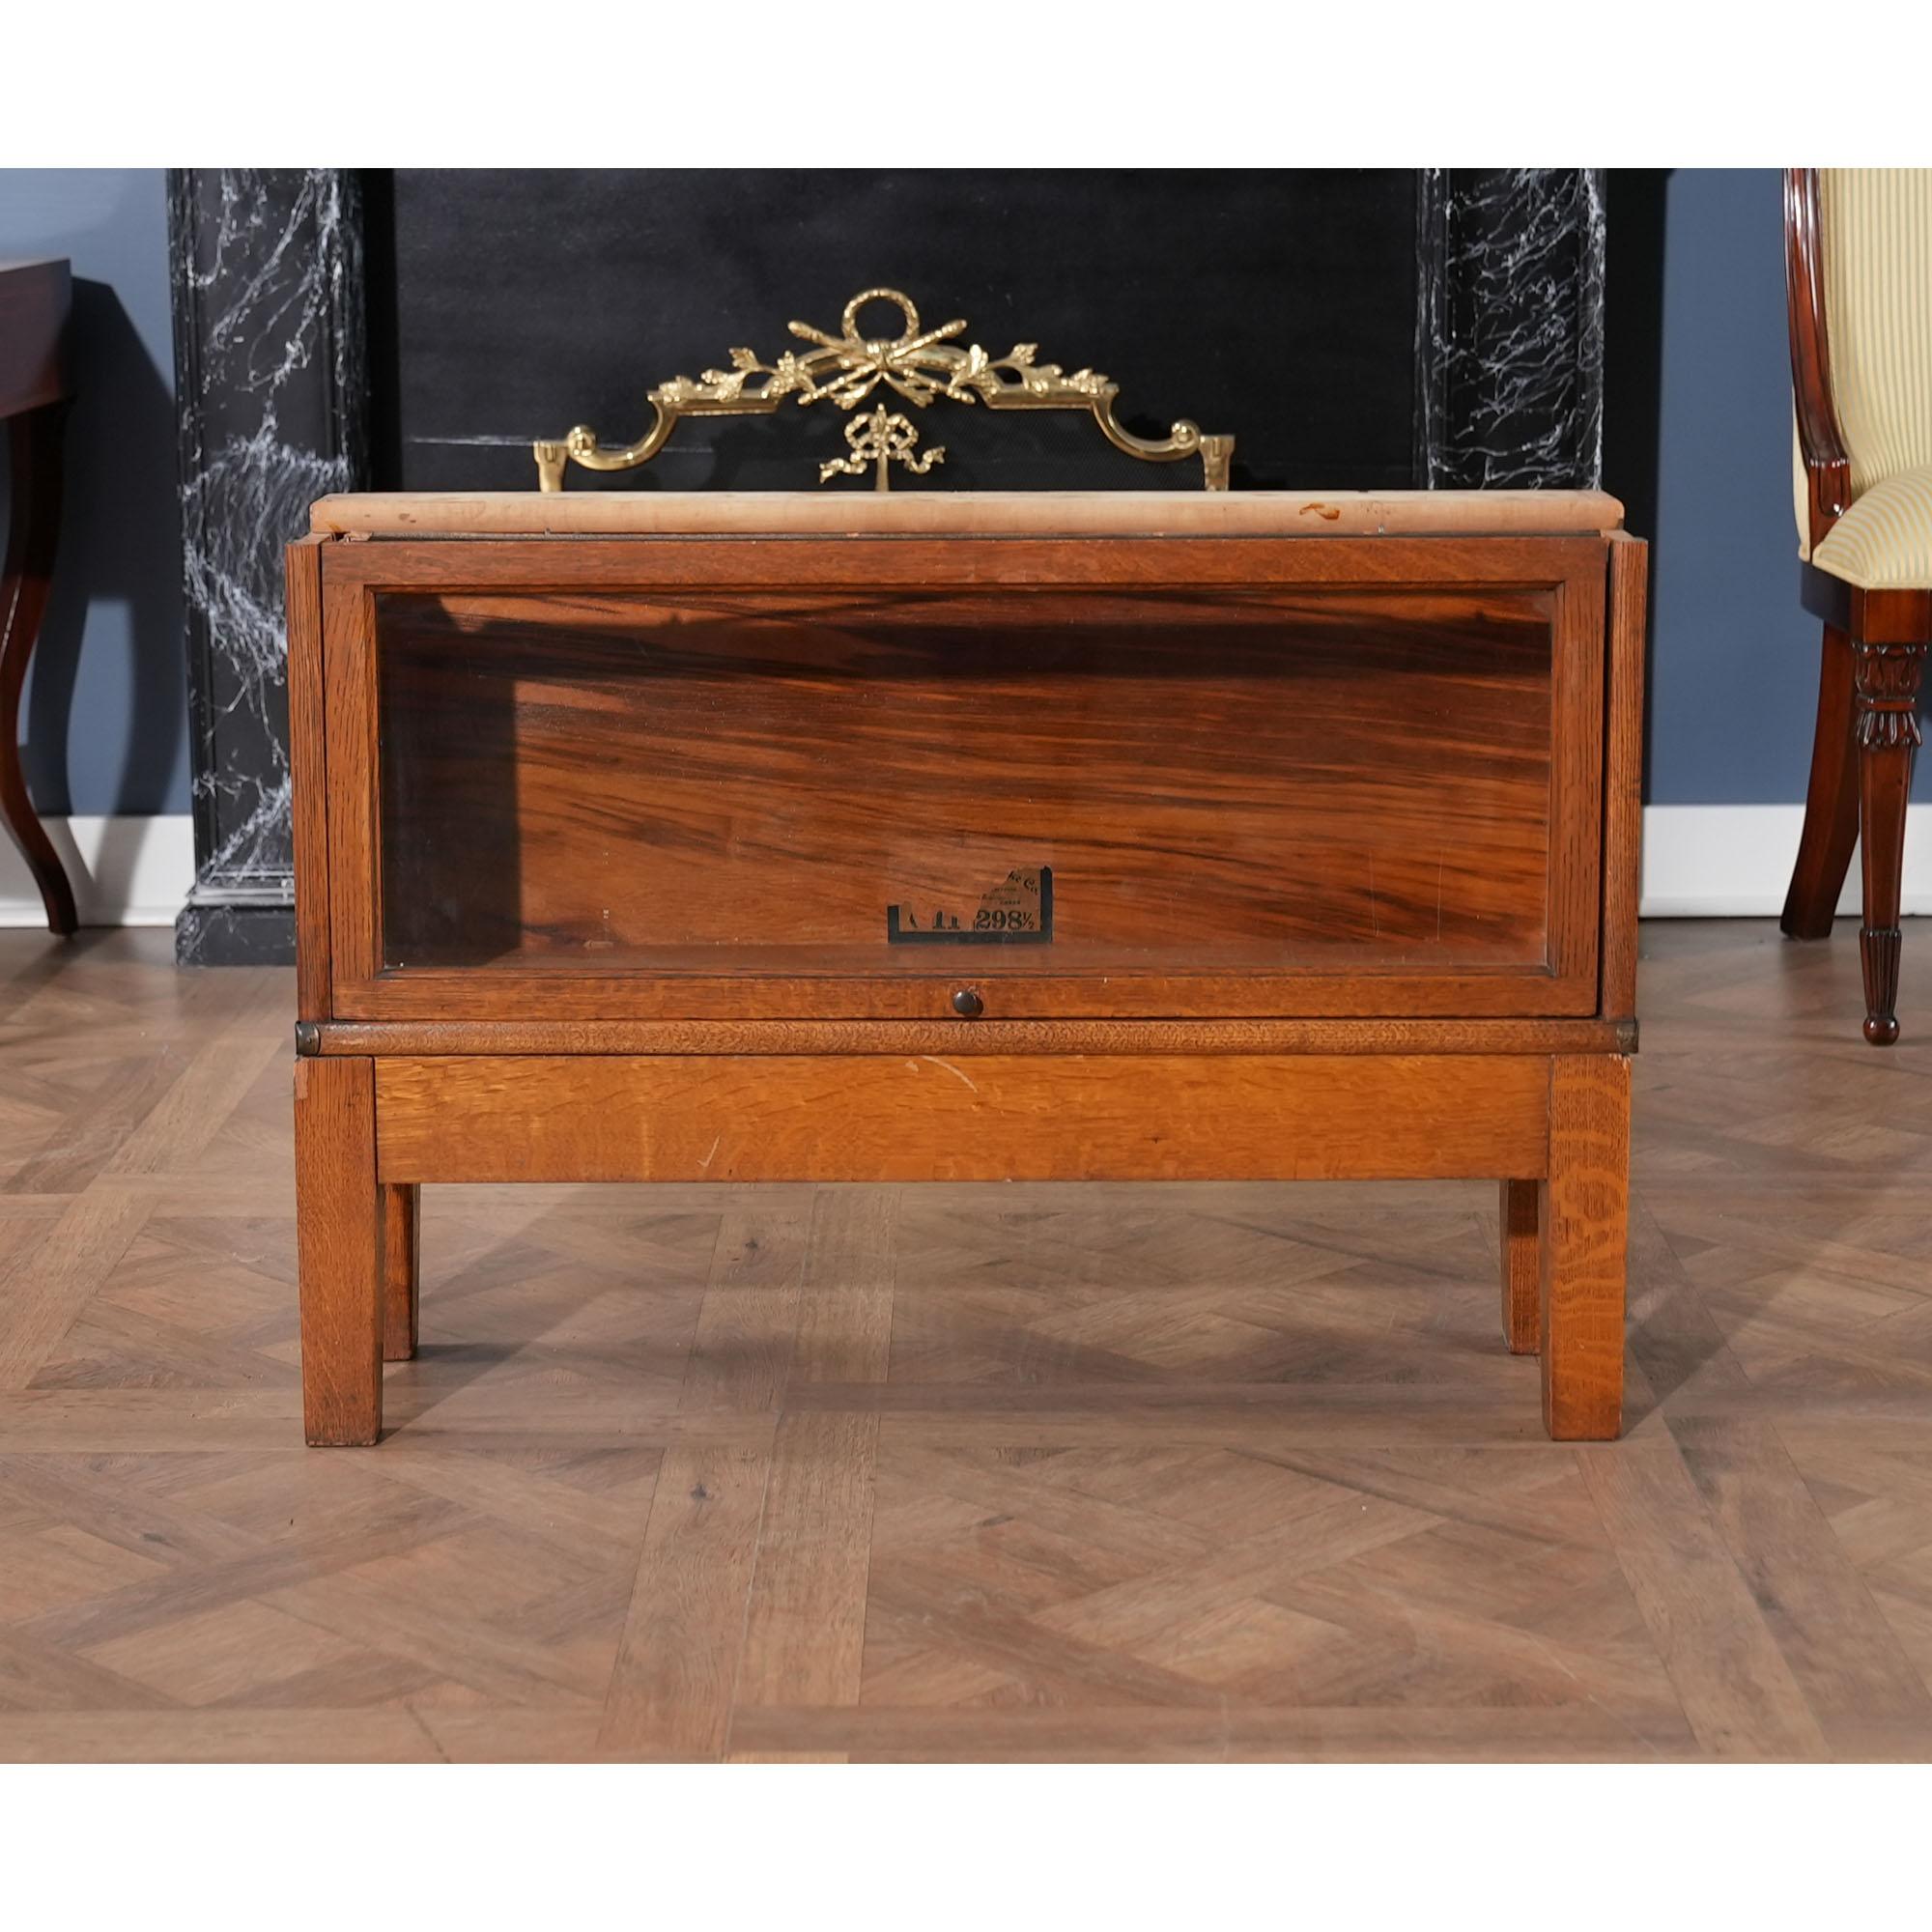 From Niagara Furniture; a Vintage Oak Globe Wernicke Bookcase – the perfect addition to any home or office space! Crafted from high-quality American oak, this bookcase is about 100 years old but still exudes the same elegance and sophistication as